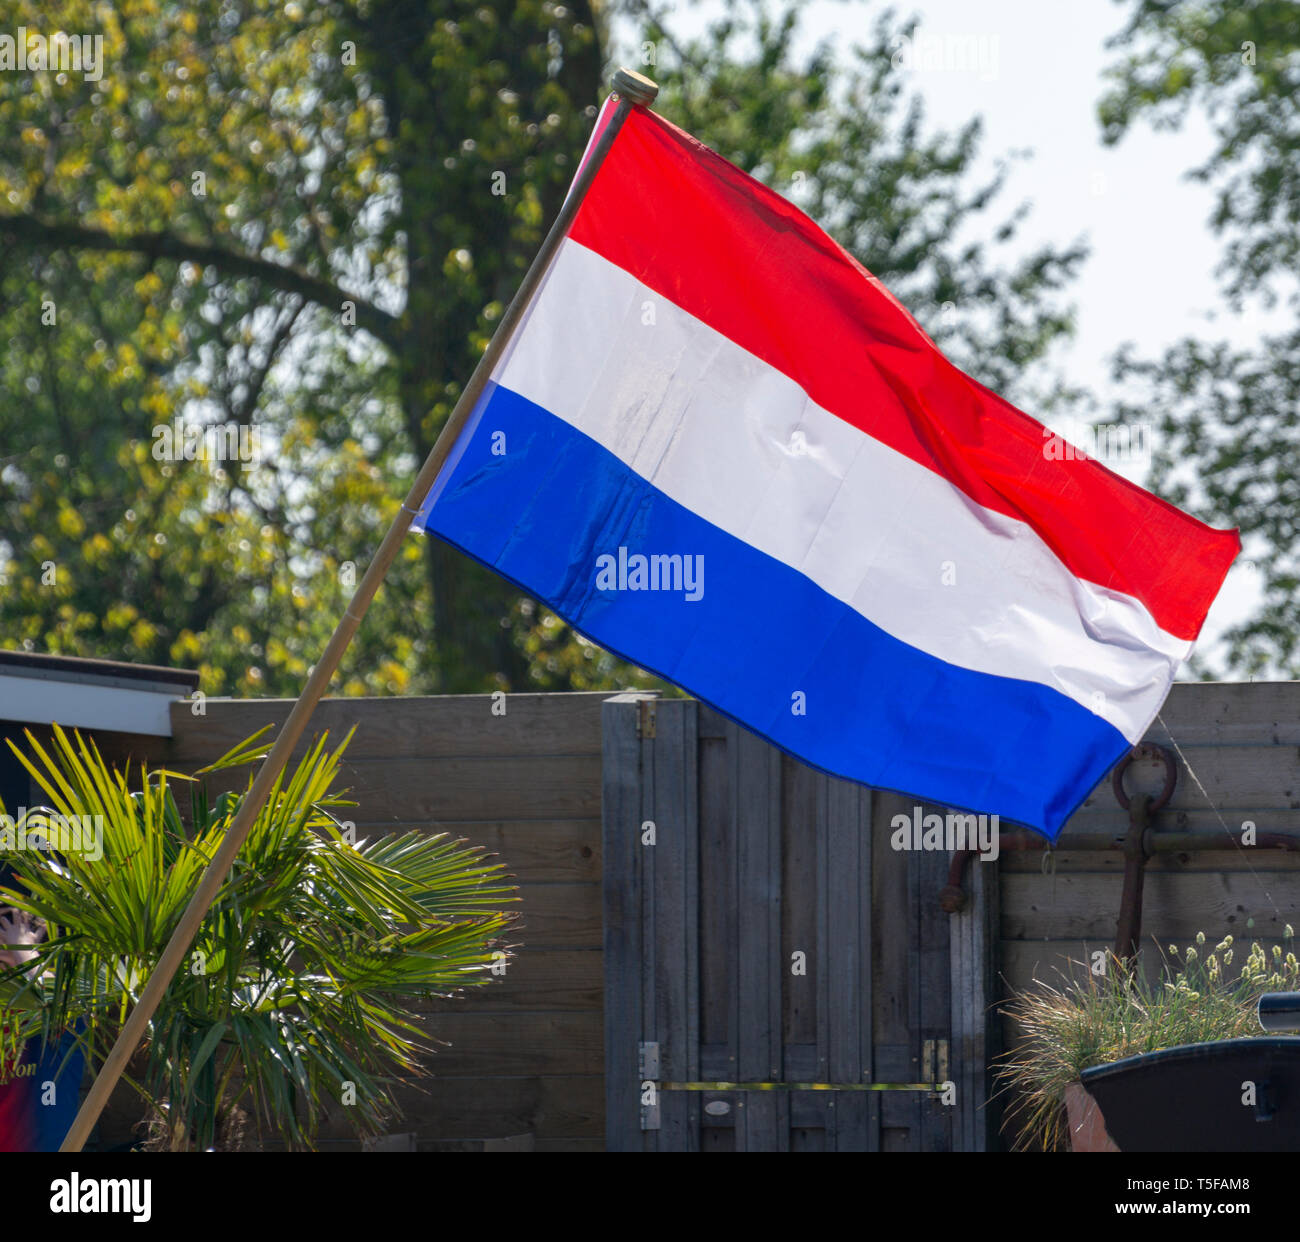 Flag Of The Kingdom Of The Netherlands Dutch National Flag In Three Colors Red White And Blue Close Up Stock Photo Alamy